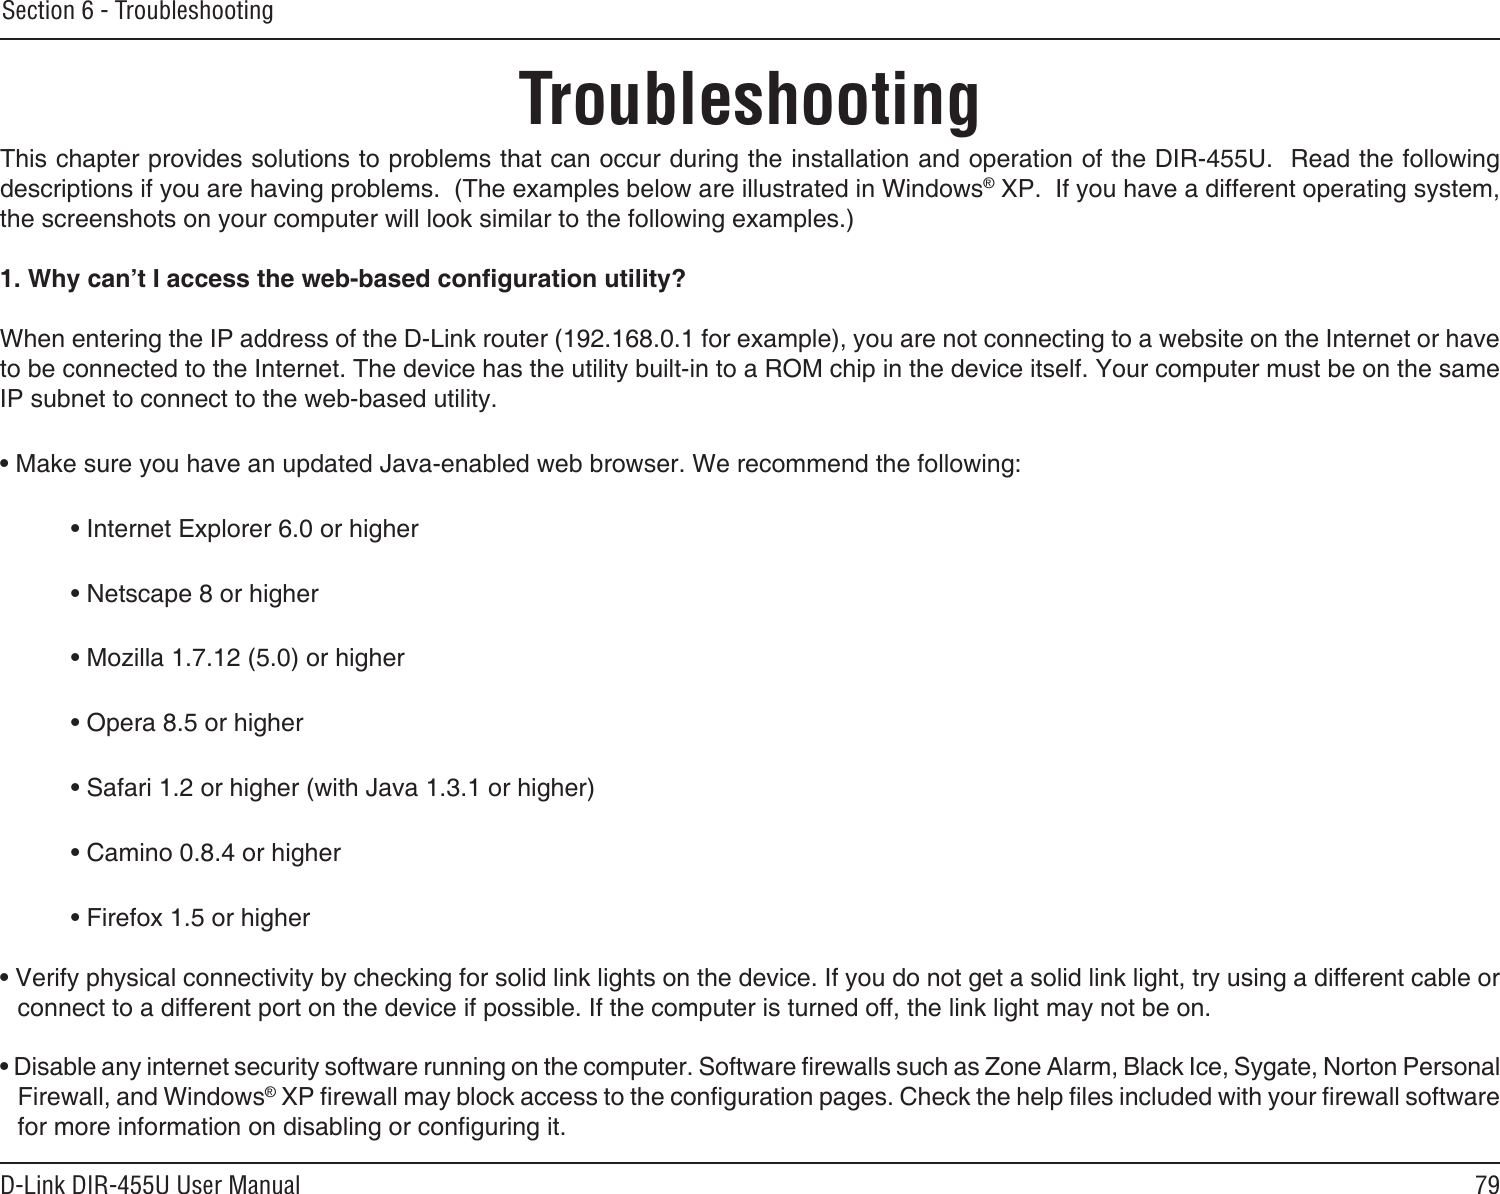 79D-Link DIR-455U User ManualSection 6 - TroubleshootingTroubleshootingThis chapter provides solutions to problems that can occur during the installation and operation of the DIR-455U.  Read the following descriptions if you are having problems.  (The examples below are illustrated in Windows® XP.  If you have a different operating system, the screenshots on your computer will look similar to the following examples.)1. Why can’t I access the web-based conguration utility?When entering the IP address of the D-Link router (192.168.0.1 for example), you are not connecting to a website on the Internet or have to be connected to the Internet. The device has the utility built-in to a ROM chip in the device itself. Your computer must be on the same IP subnet to connect to the web-based utility. • Make sure you have an updated Java-enabled web browser. We recommend the following: • Internet Explorer 6.0 or higher • Netscape 8 or higher • Mozilla 1.7.12 (5.0) or higher • Opera 8.5 or higher • Safari 1.2 or higher (with Java 1.3.1 or higher) • Camino 0.8.4 or higher • Firefox 1.5 or higher • Verify physical connectivity by checking for solid link lights on the device. If you do not get a solid link light, try using a different cable or connect to a different port on the device if possible. If the computer is turned off, the link light may not be on.• Disable any internet security software running on the computer. Software rewalls such as Zone Alarm, Black Ice, Sygate, Norton Personal Firewall, and Windows® XP rewall may block access to the conguration pages. Check the help les included with your rewall software for more information on disabling or conguring it.